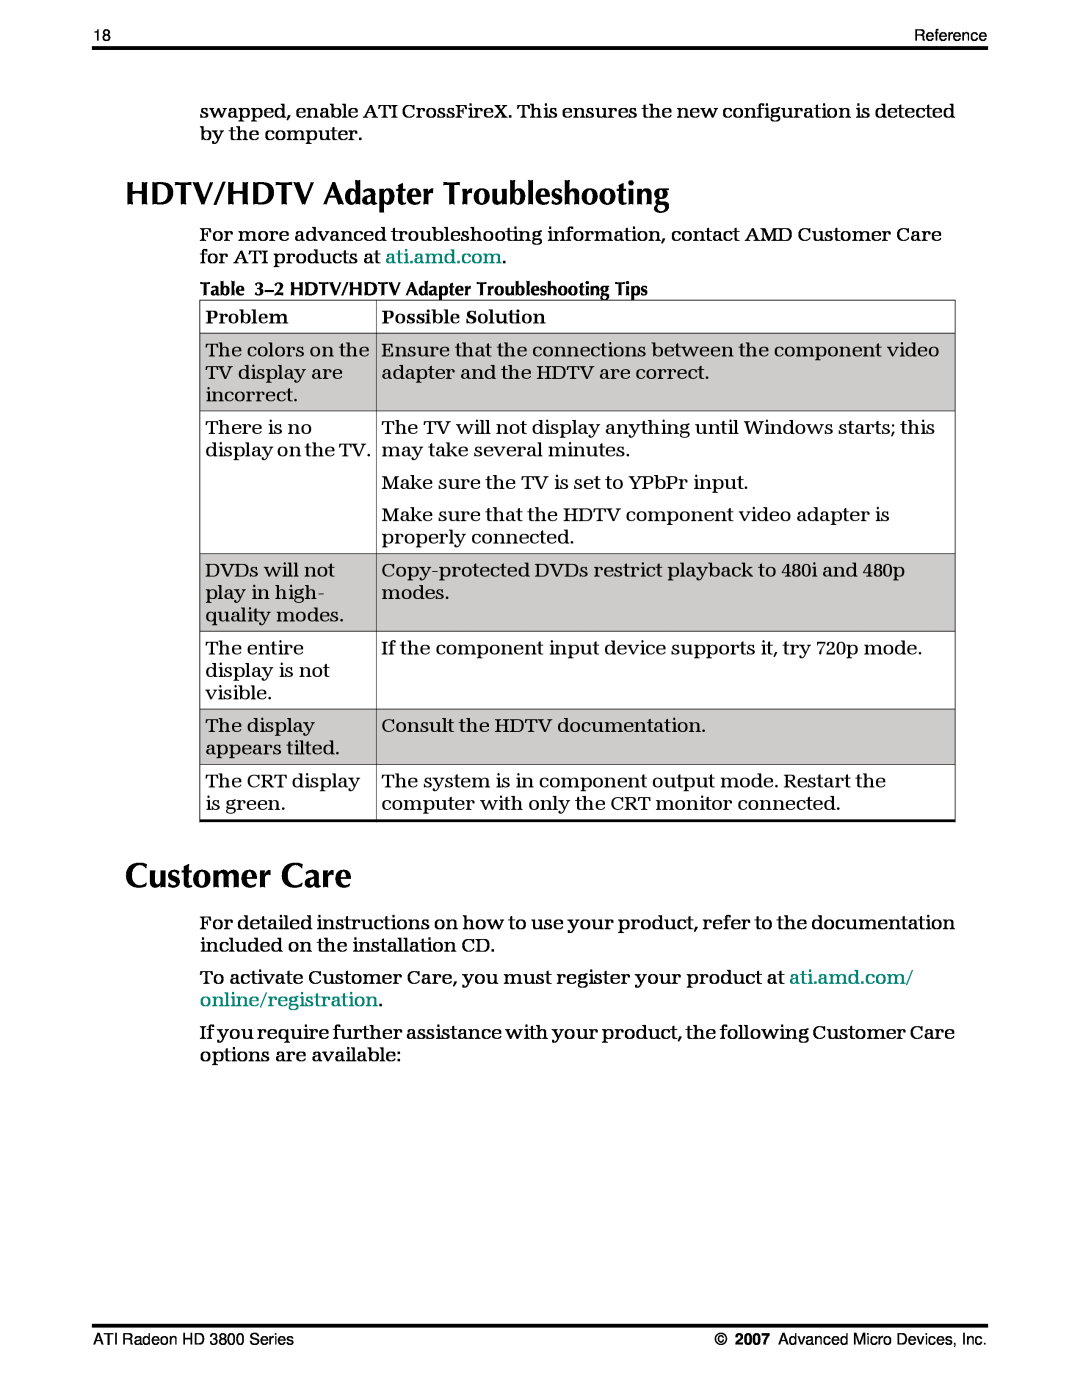 AMD HD 3800 manual Customer Care, 2 HDTV/HDTV Adapter Troubleshooting Tips, Problem, Possible Solution 